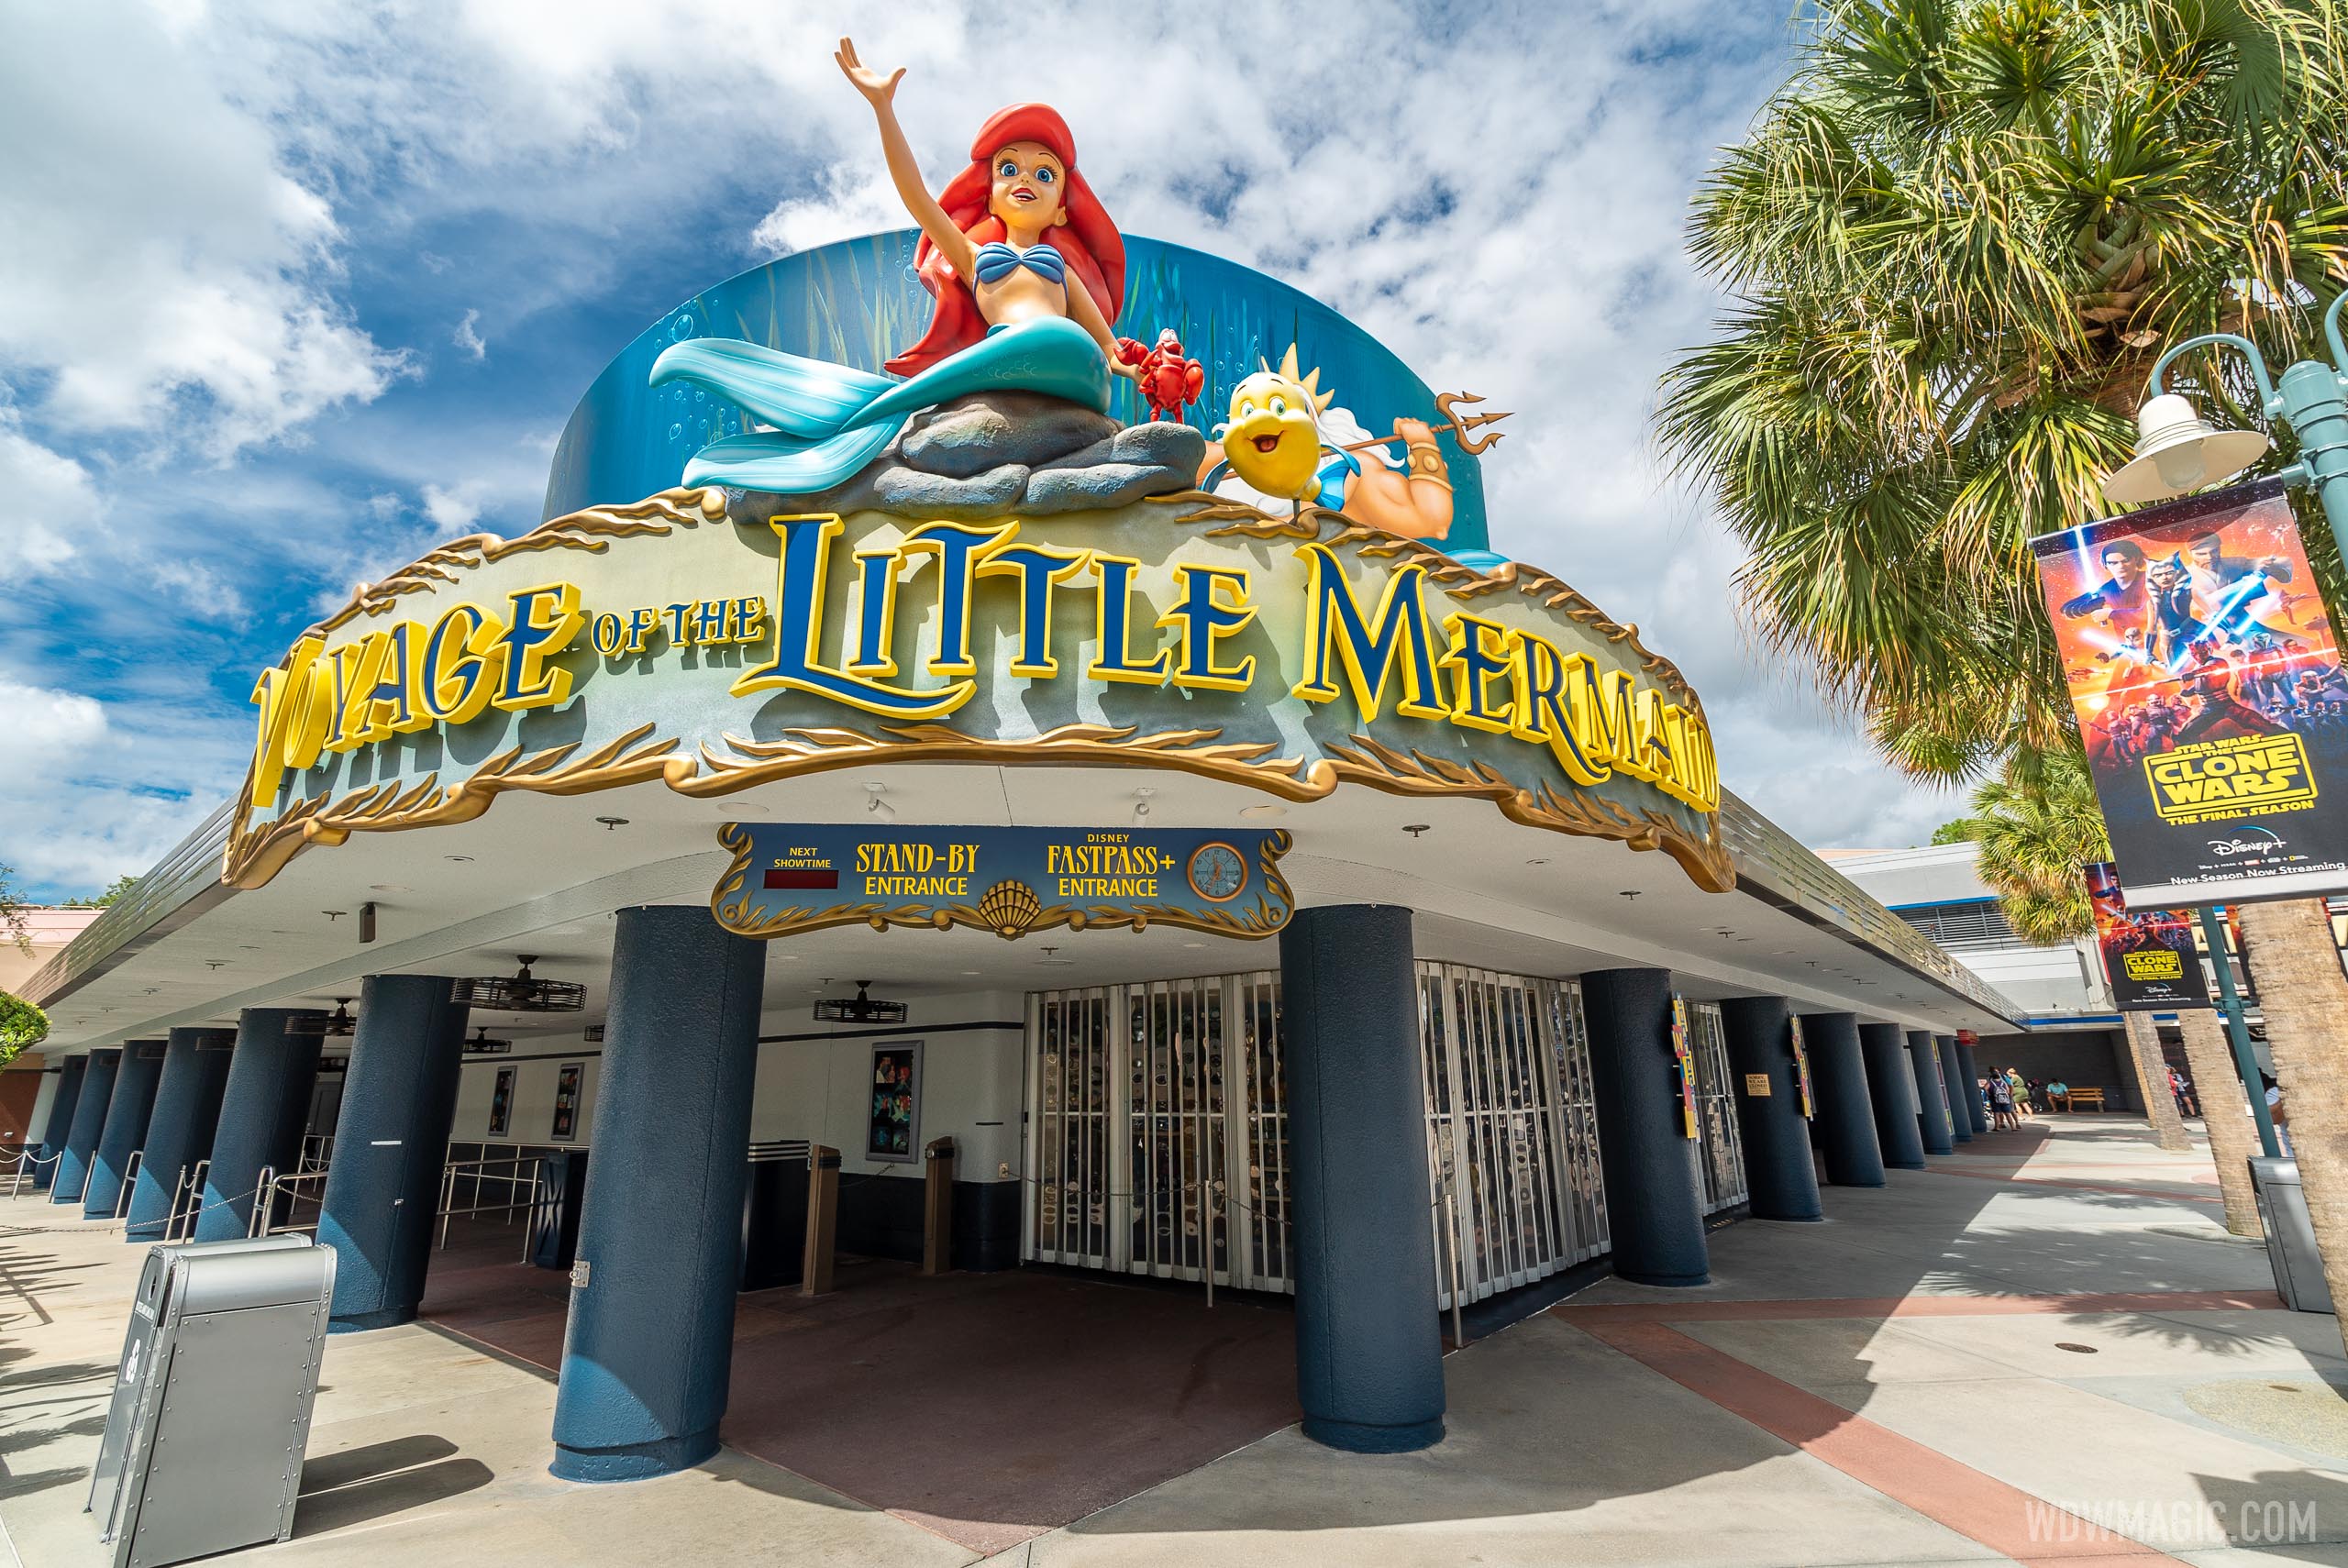 Voyage of the Little Mermaid overview Photo 1 of 5